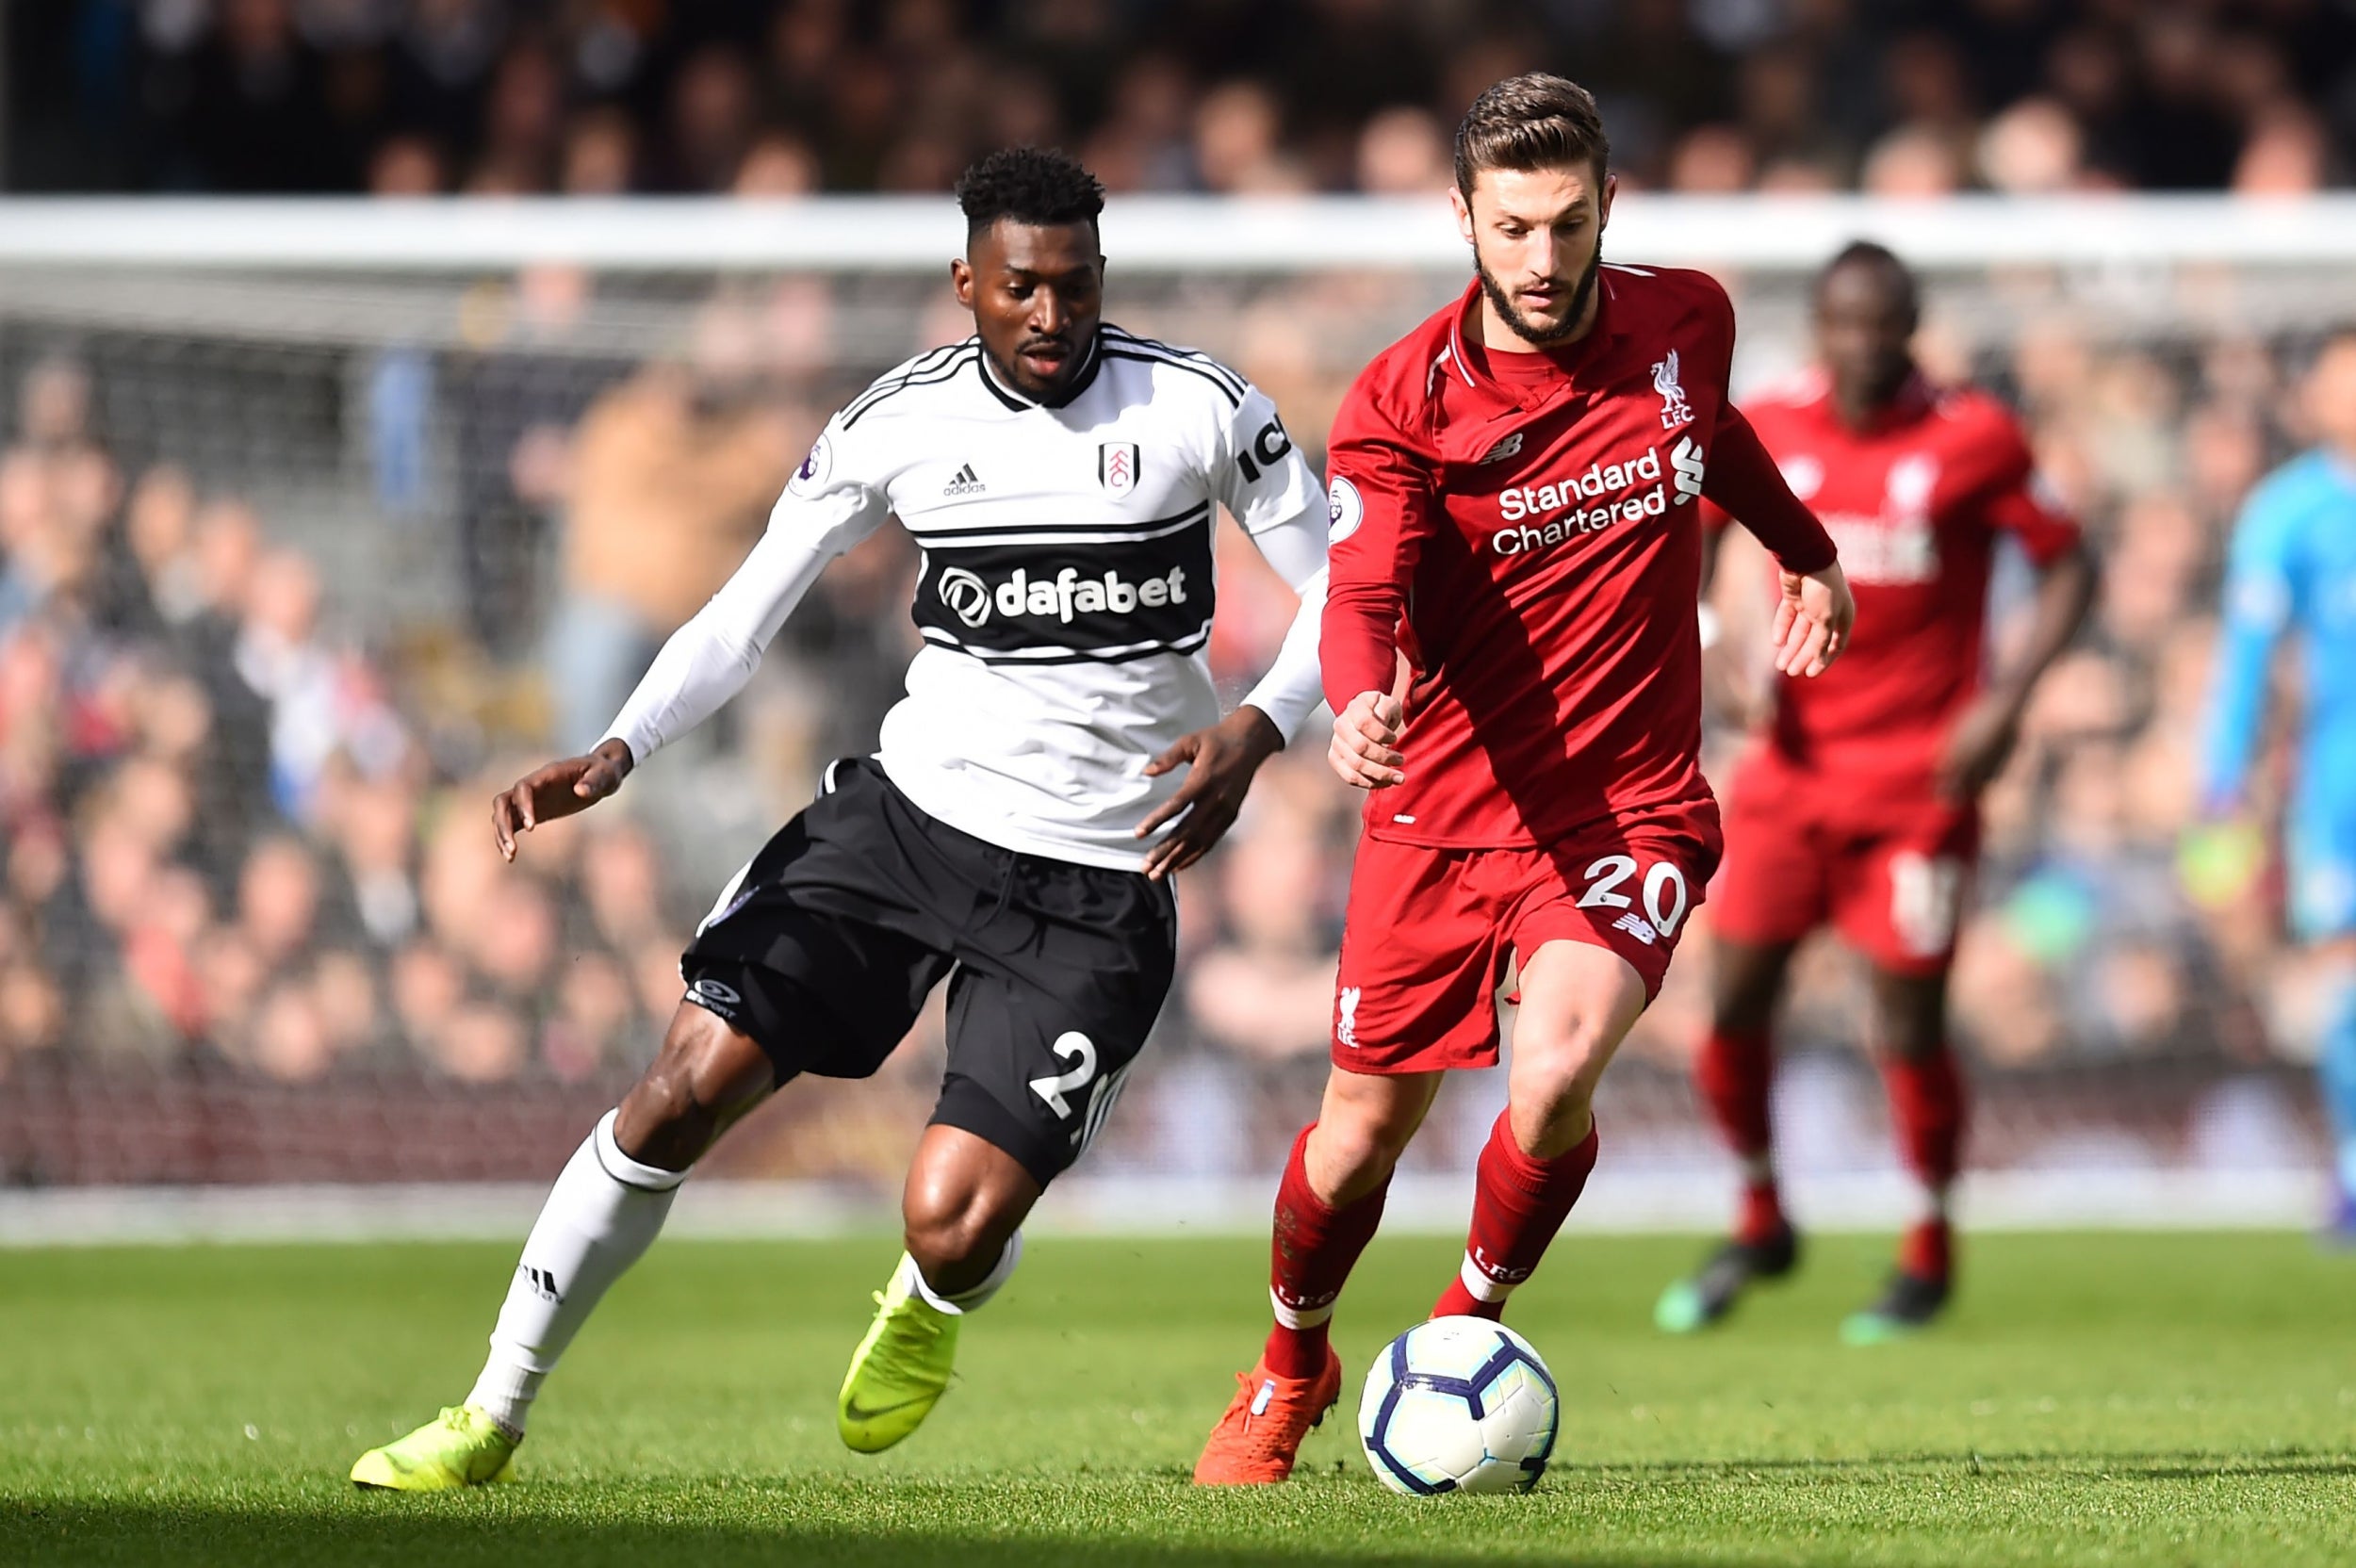 Lallana made 16 appearances in all competitions in the 2018/19 season (AFP/Getty)